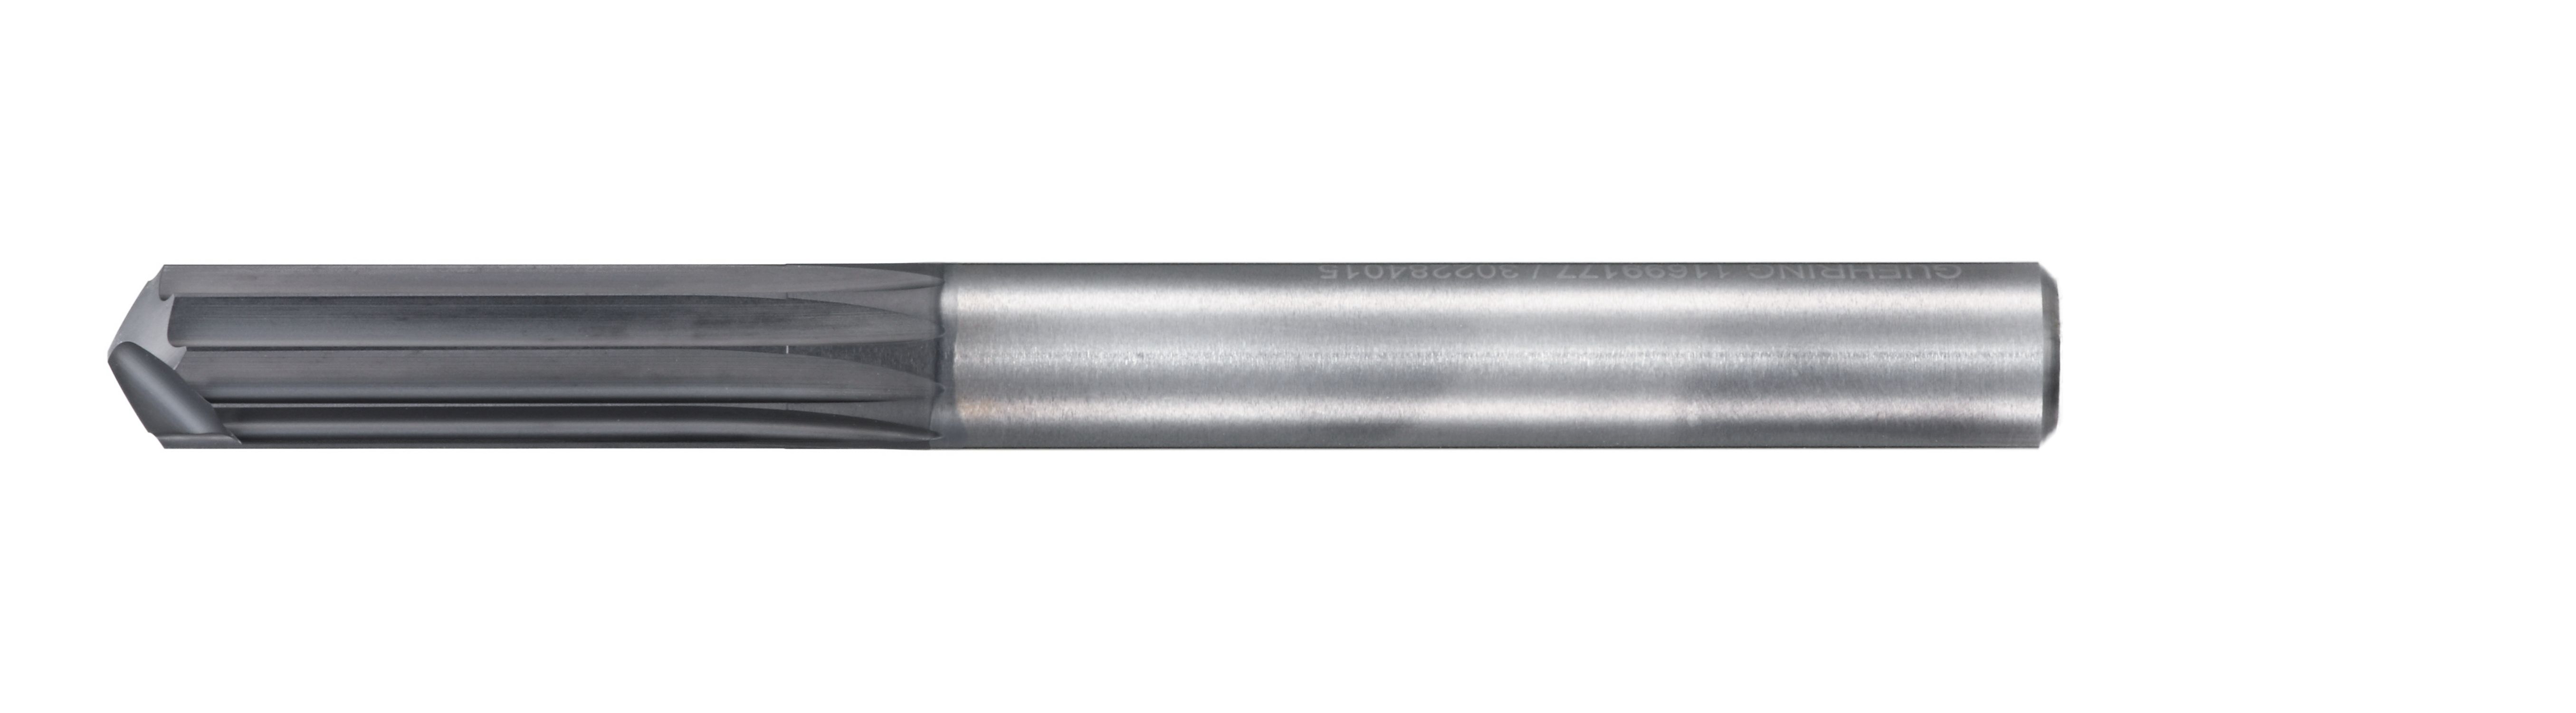 Grooving/Shouldering Multi-Flute End Mill for CFRP with Drill Point CR100 6720